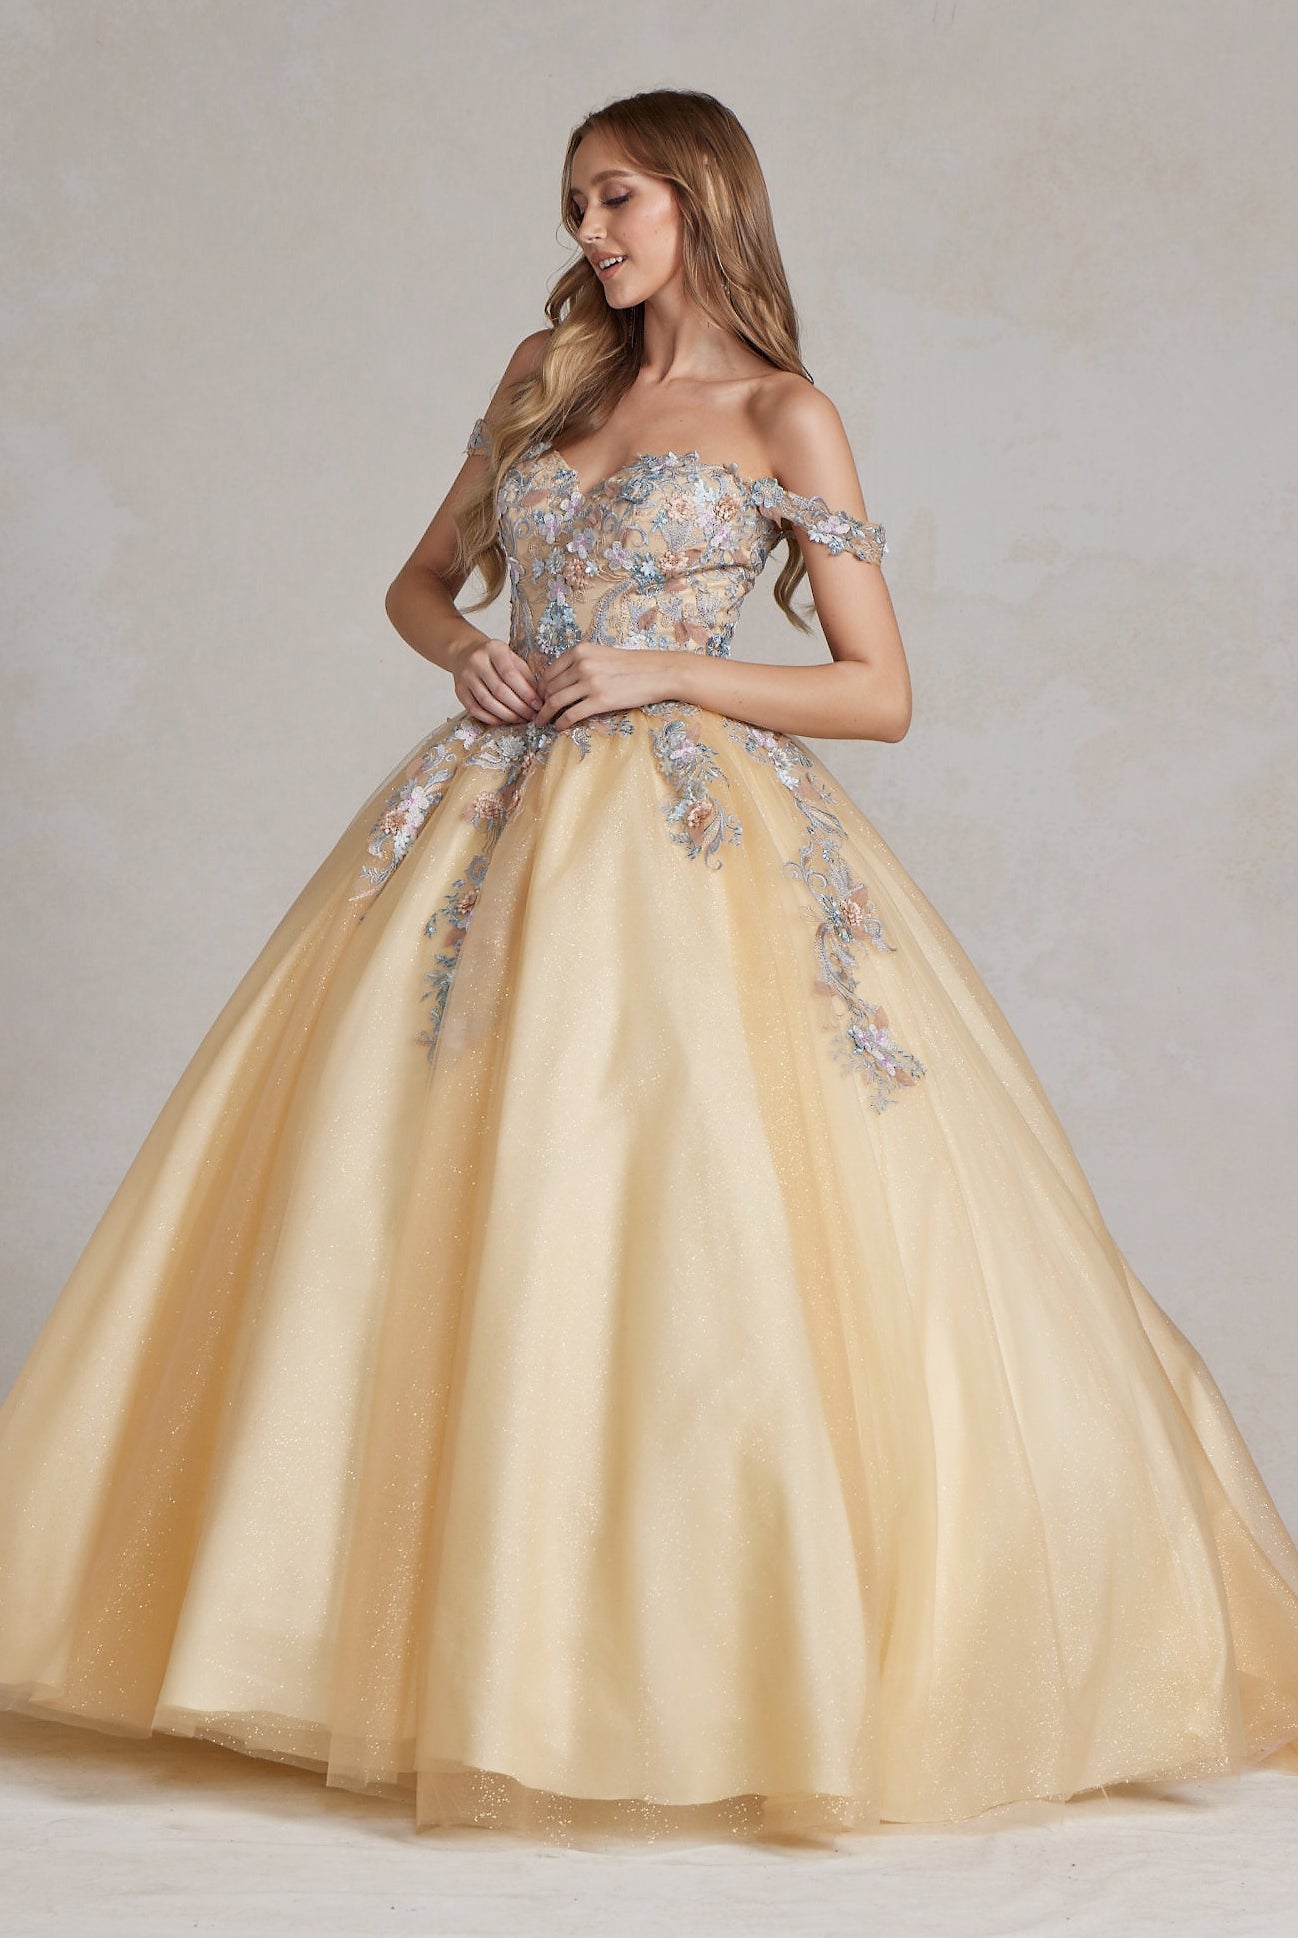 Off Shoulder Embroidered Lace Bodice Long Quinceanera Dress NXJU809-Quinceanera Dress-smcfashion.com